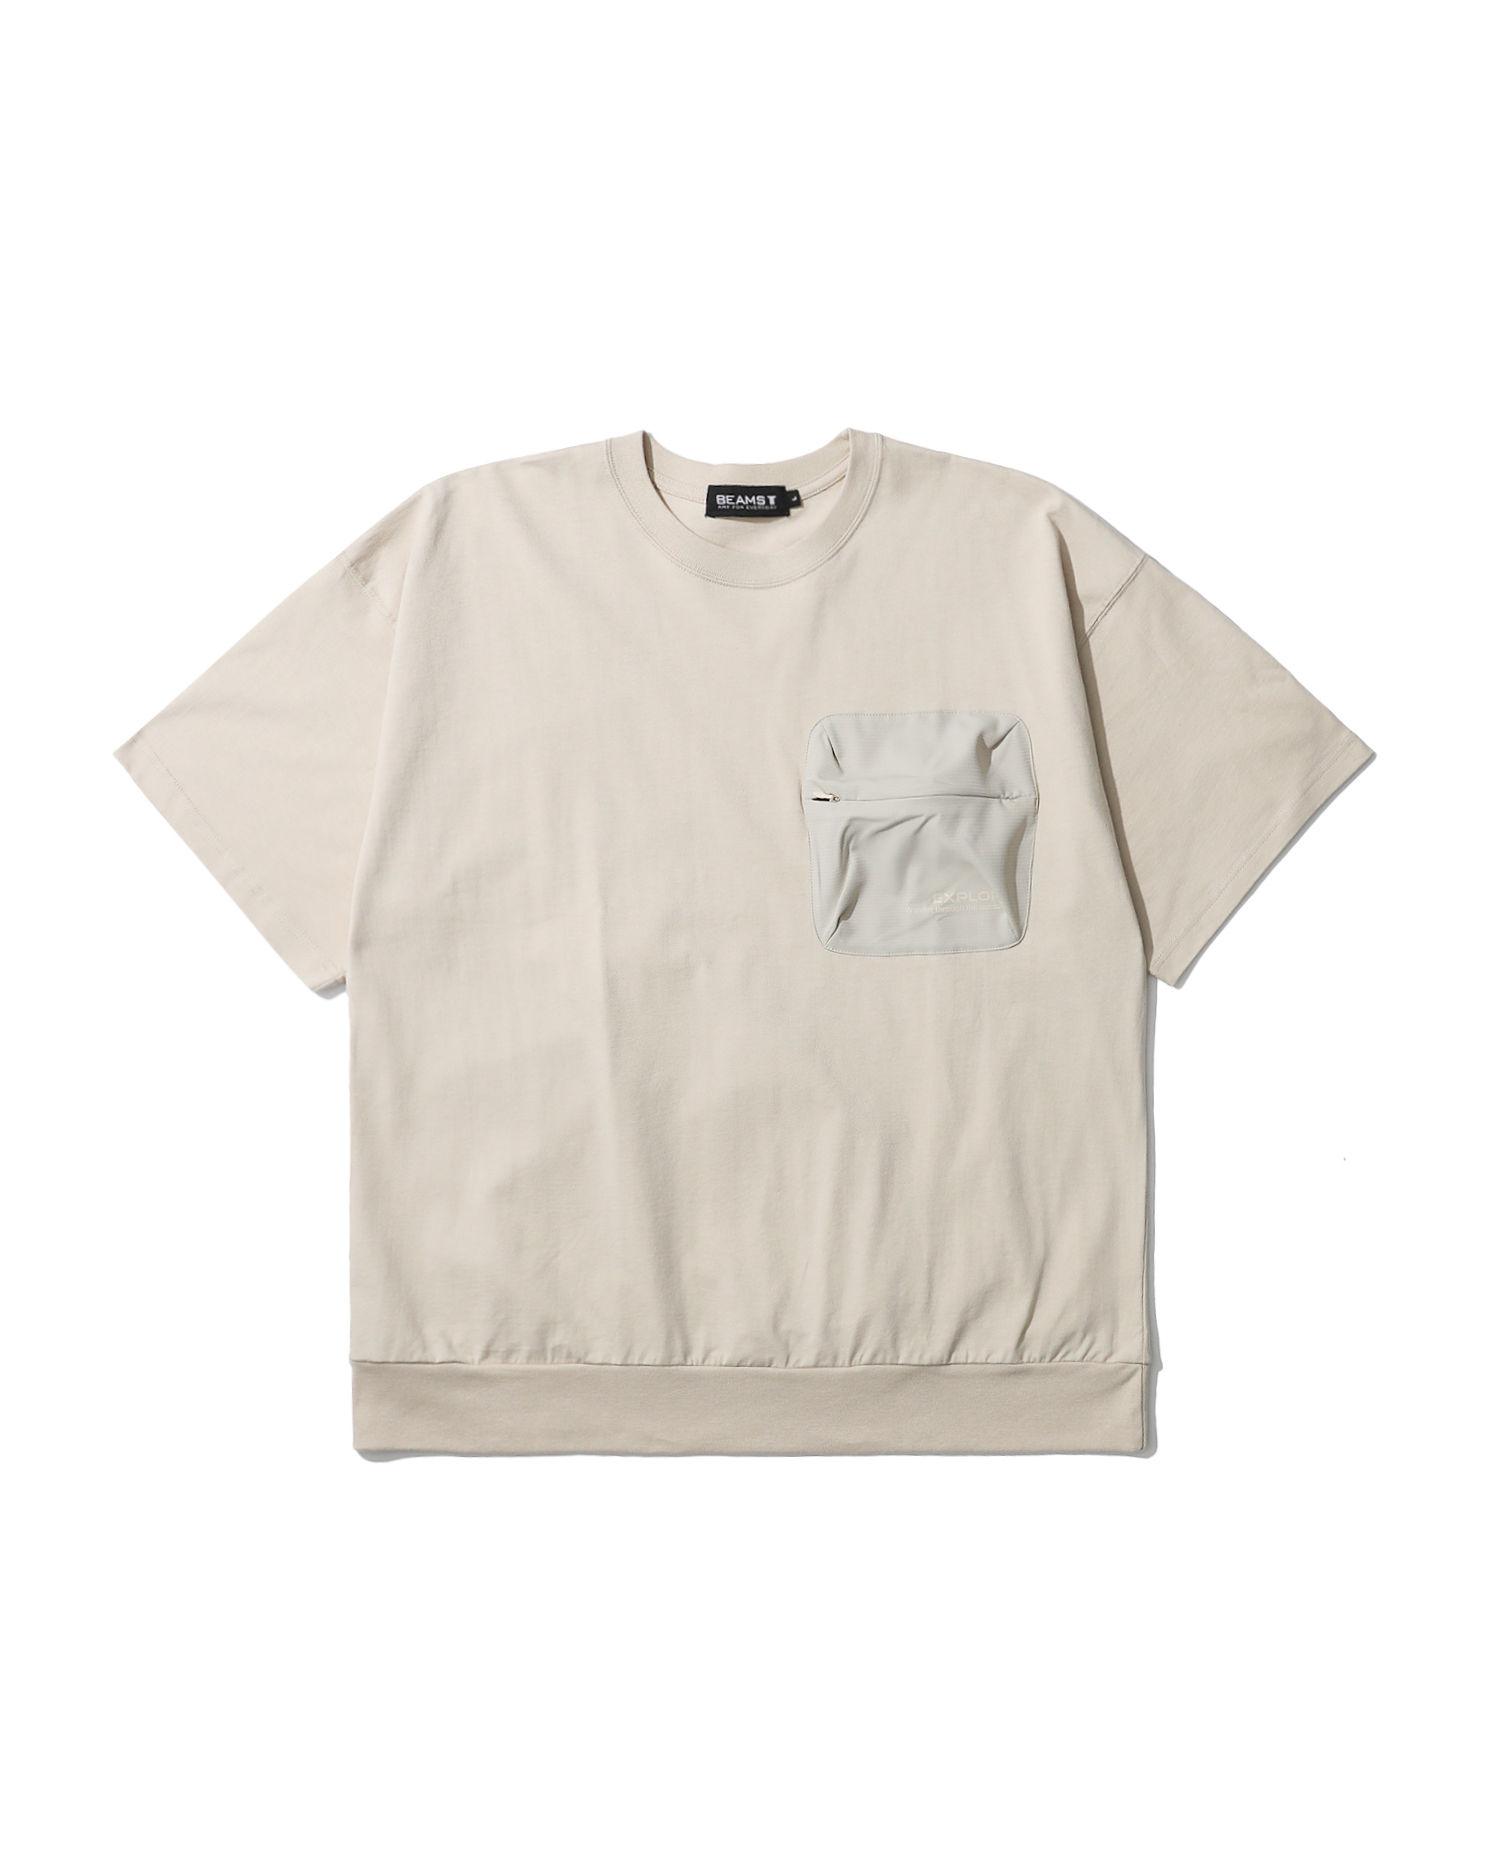 Pocketed tee by BEAMS T